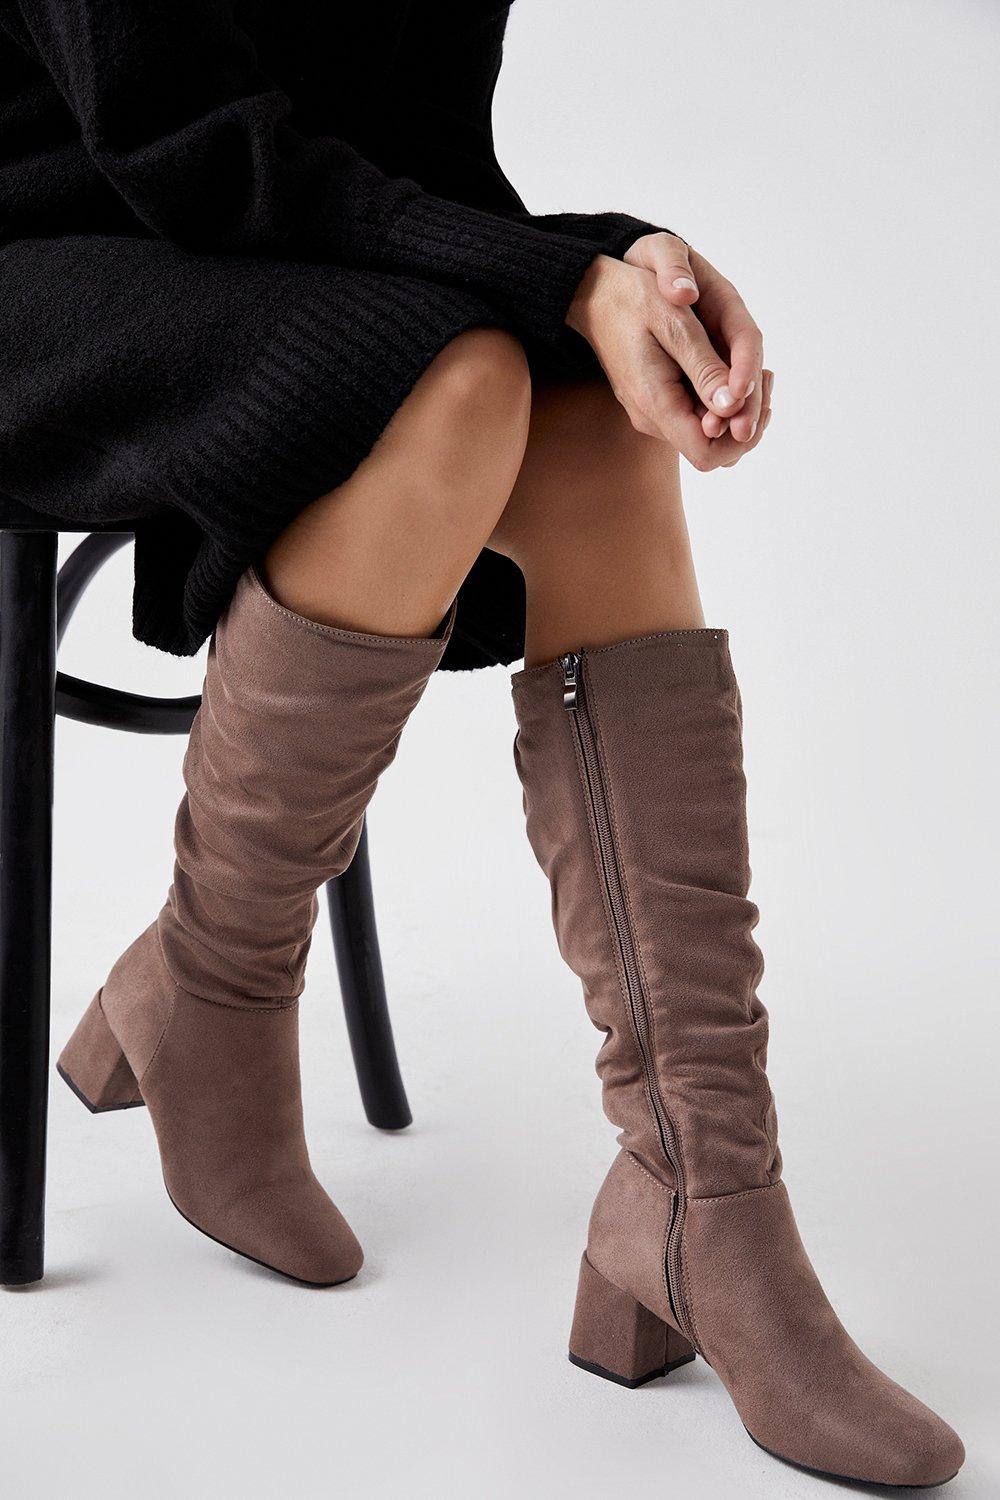 Women's Kaya Ruched Knee High Boots - taupe - 6